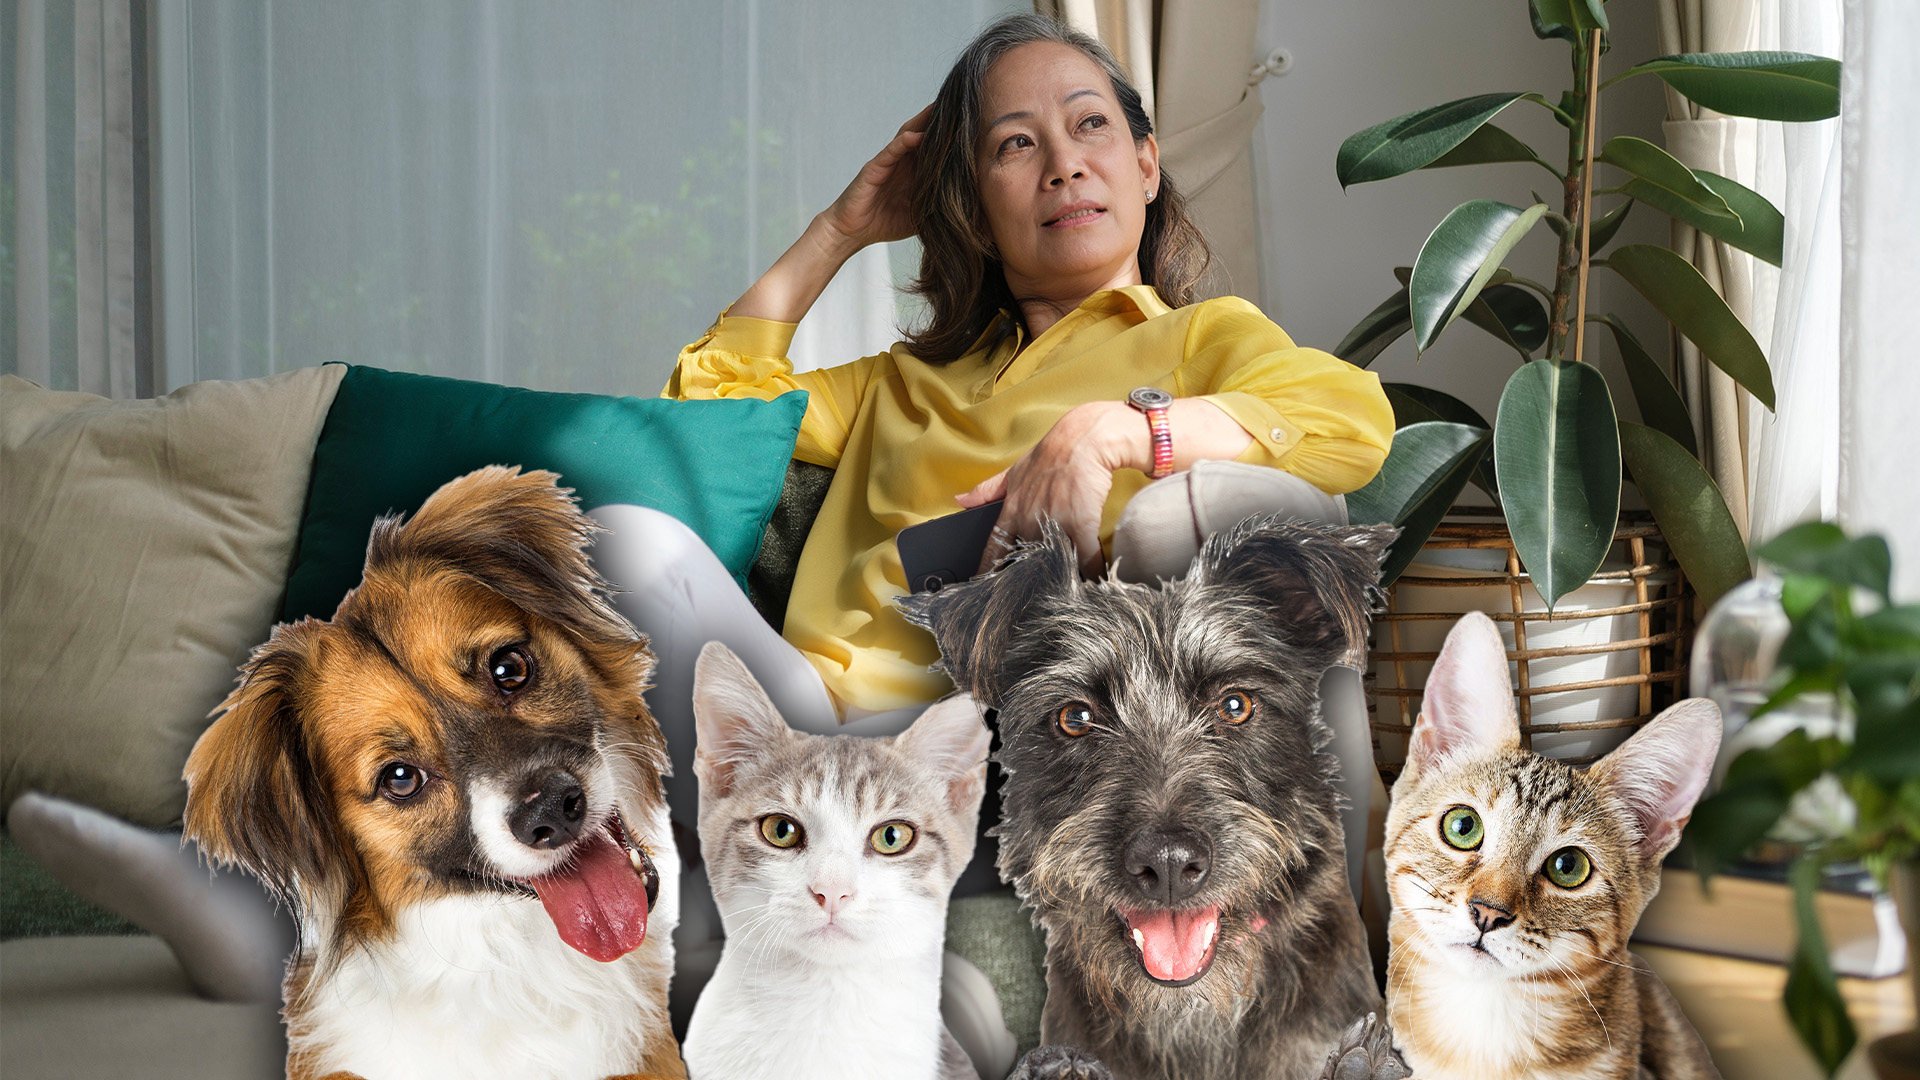 An elderly woman in China has cut her children out of her will because they have neglected her in her old age, and is instead leaving her US$2.8 million fortune to her beloved cats and dogs. Photo: SCMP composite/Shutterstock